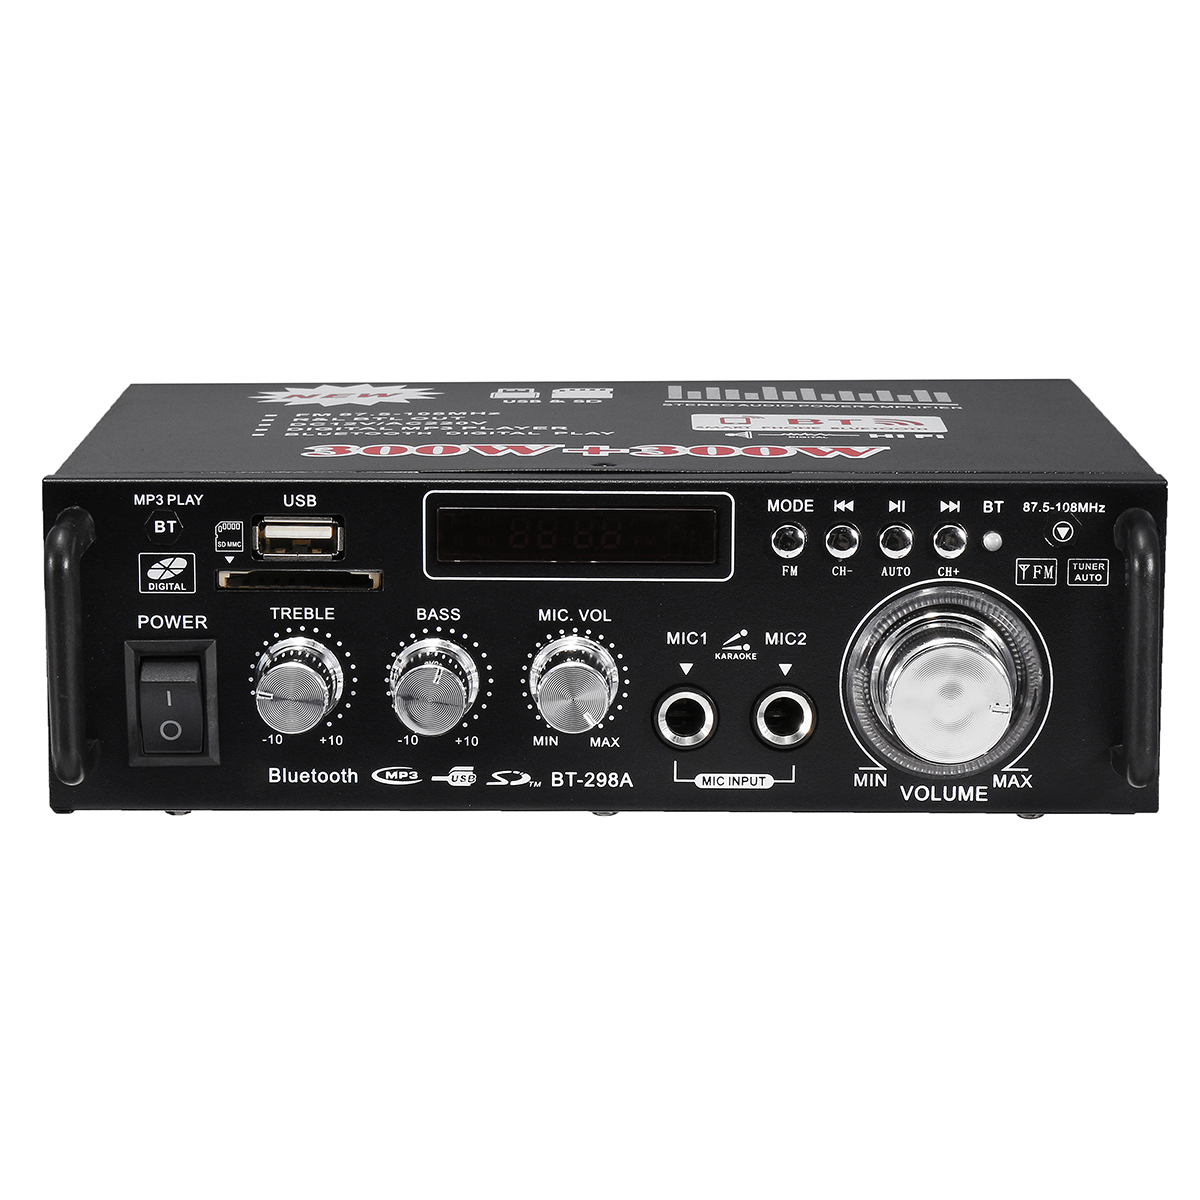 Find BT 298A 12V 220V HIFI Audio Stereo Power Amplifier bluetooth FM Radio 2CH 600W for Sale on Gipsybee.com with cryptocurrencies